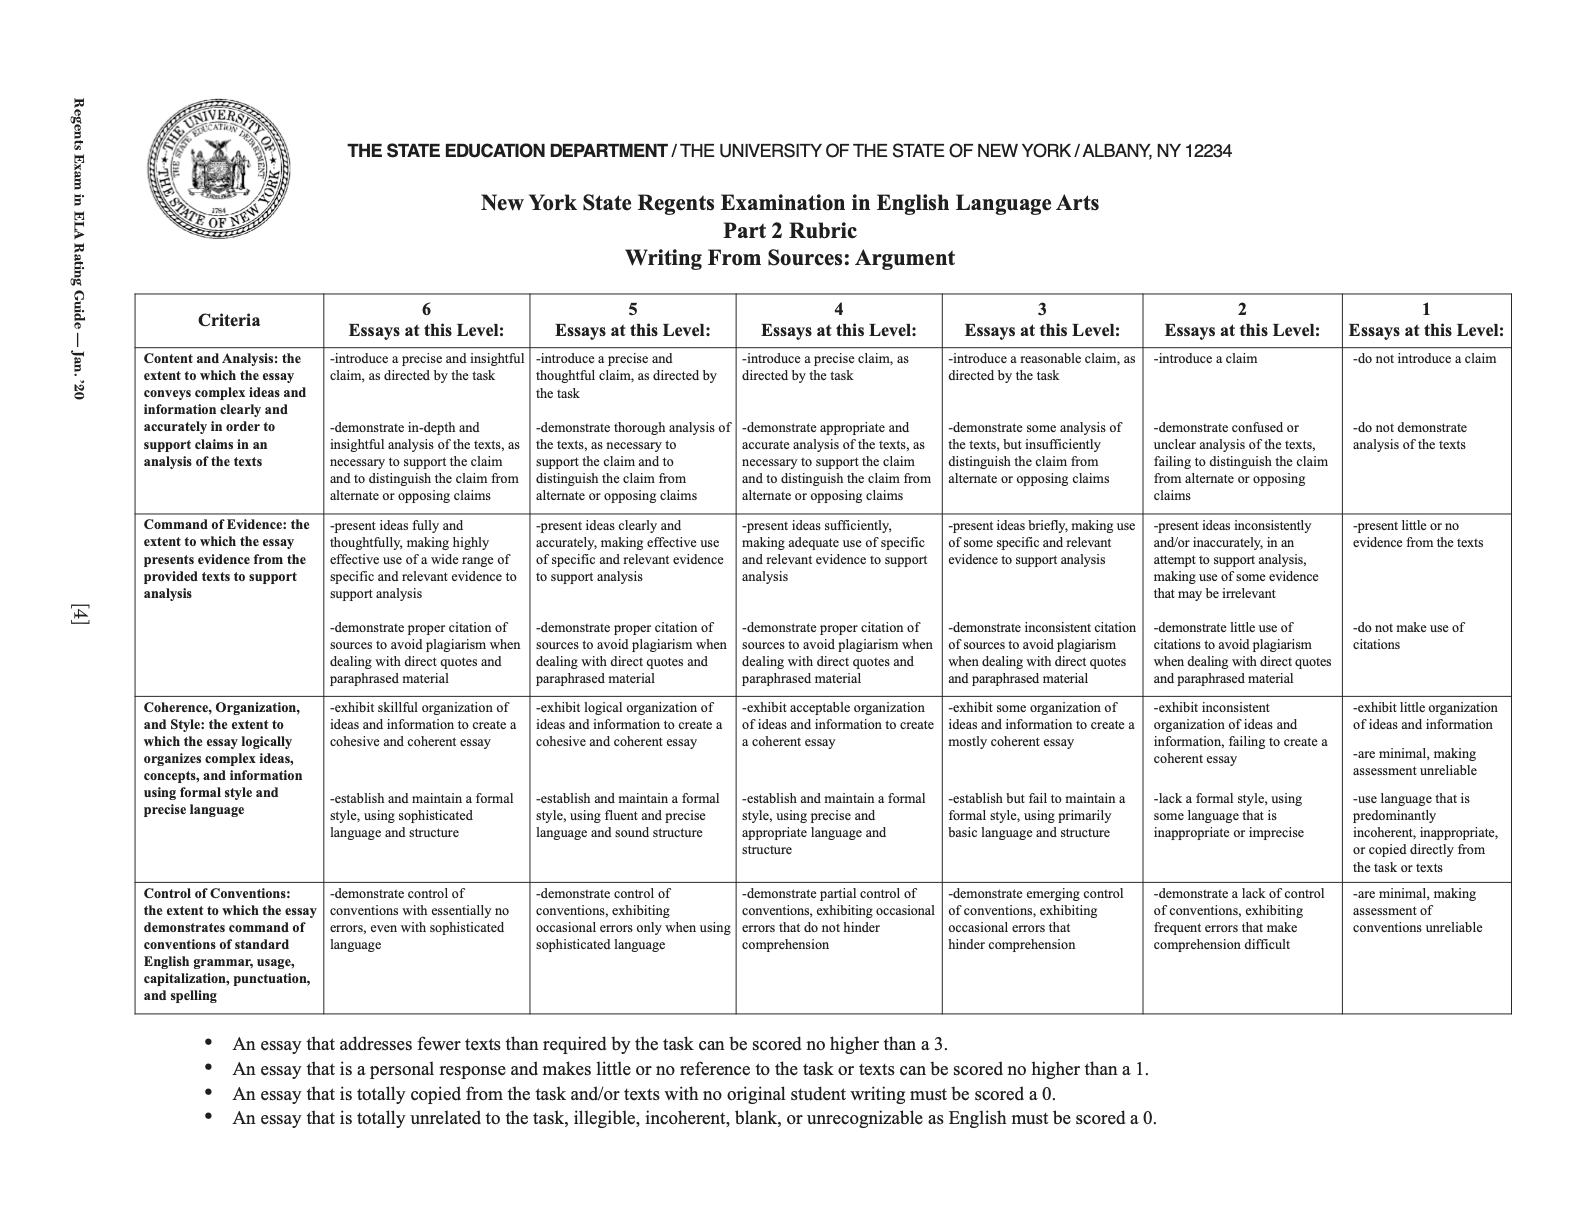 Fig. 1. Screenshot of the NYS Regents Rubric for the ELA Exam. This black-and-white image contains a screenshot of the rubric for the New York State Regents Examination in Language Arts. The seal for The University of The State of New York is in the upper left-hand corner. The rubric consists of a 5x7 chart with criteria and the requirements for grades “6” through “1.” Below the rubric are four bullet points that explain further scoring rules for essays.
